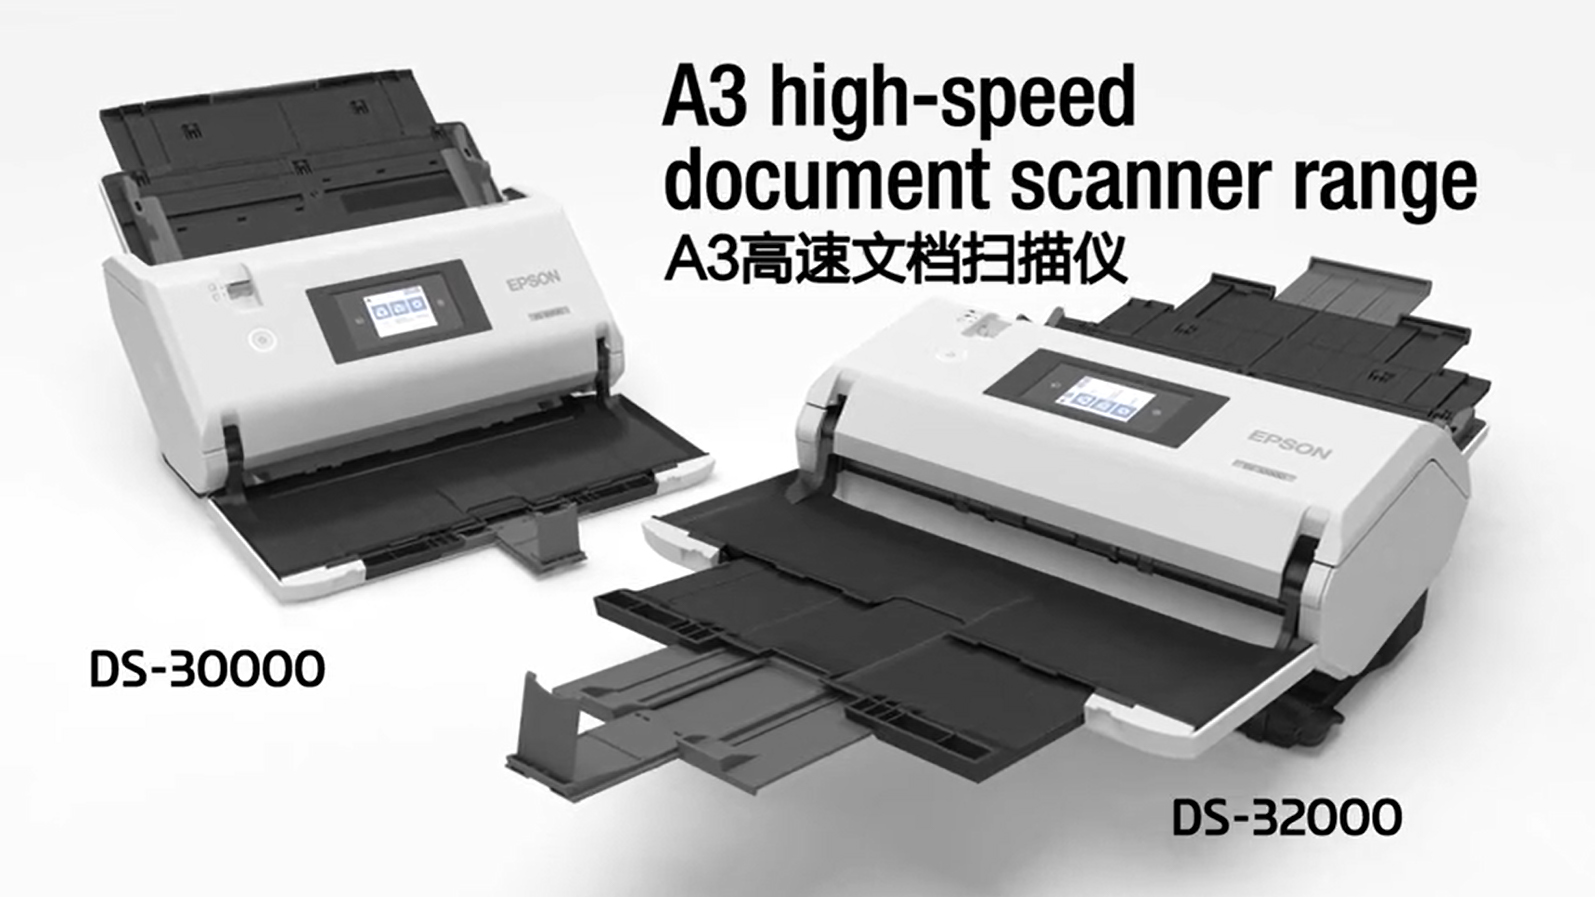 EPSON_PRODUCTS_Epson DS-31200